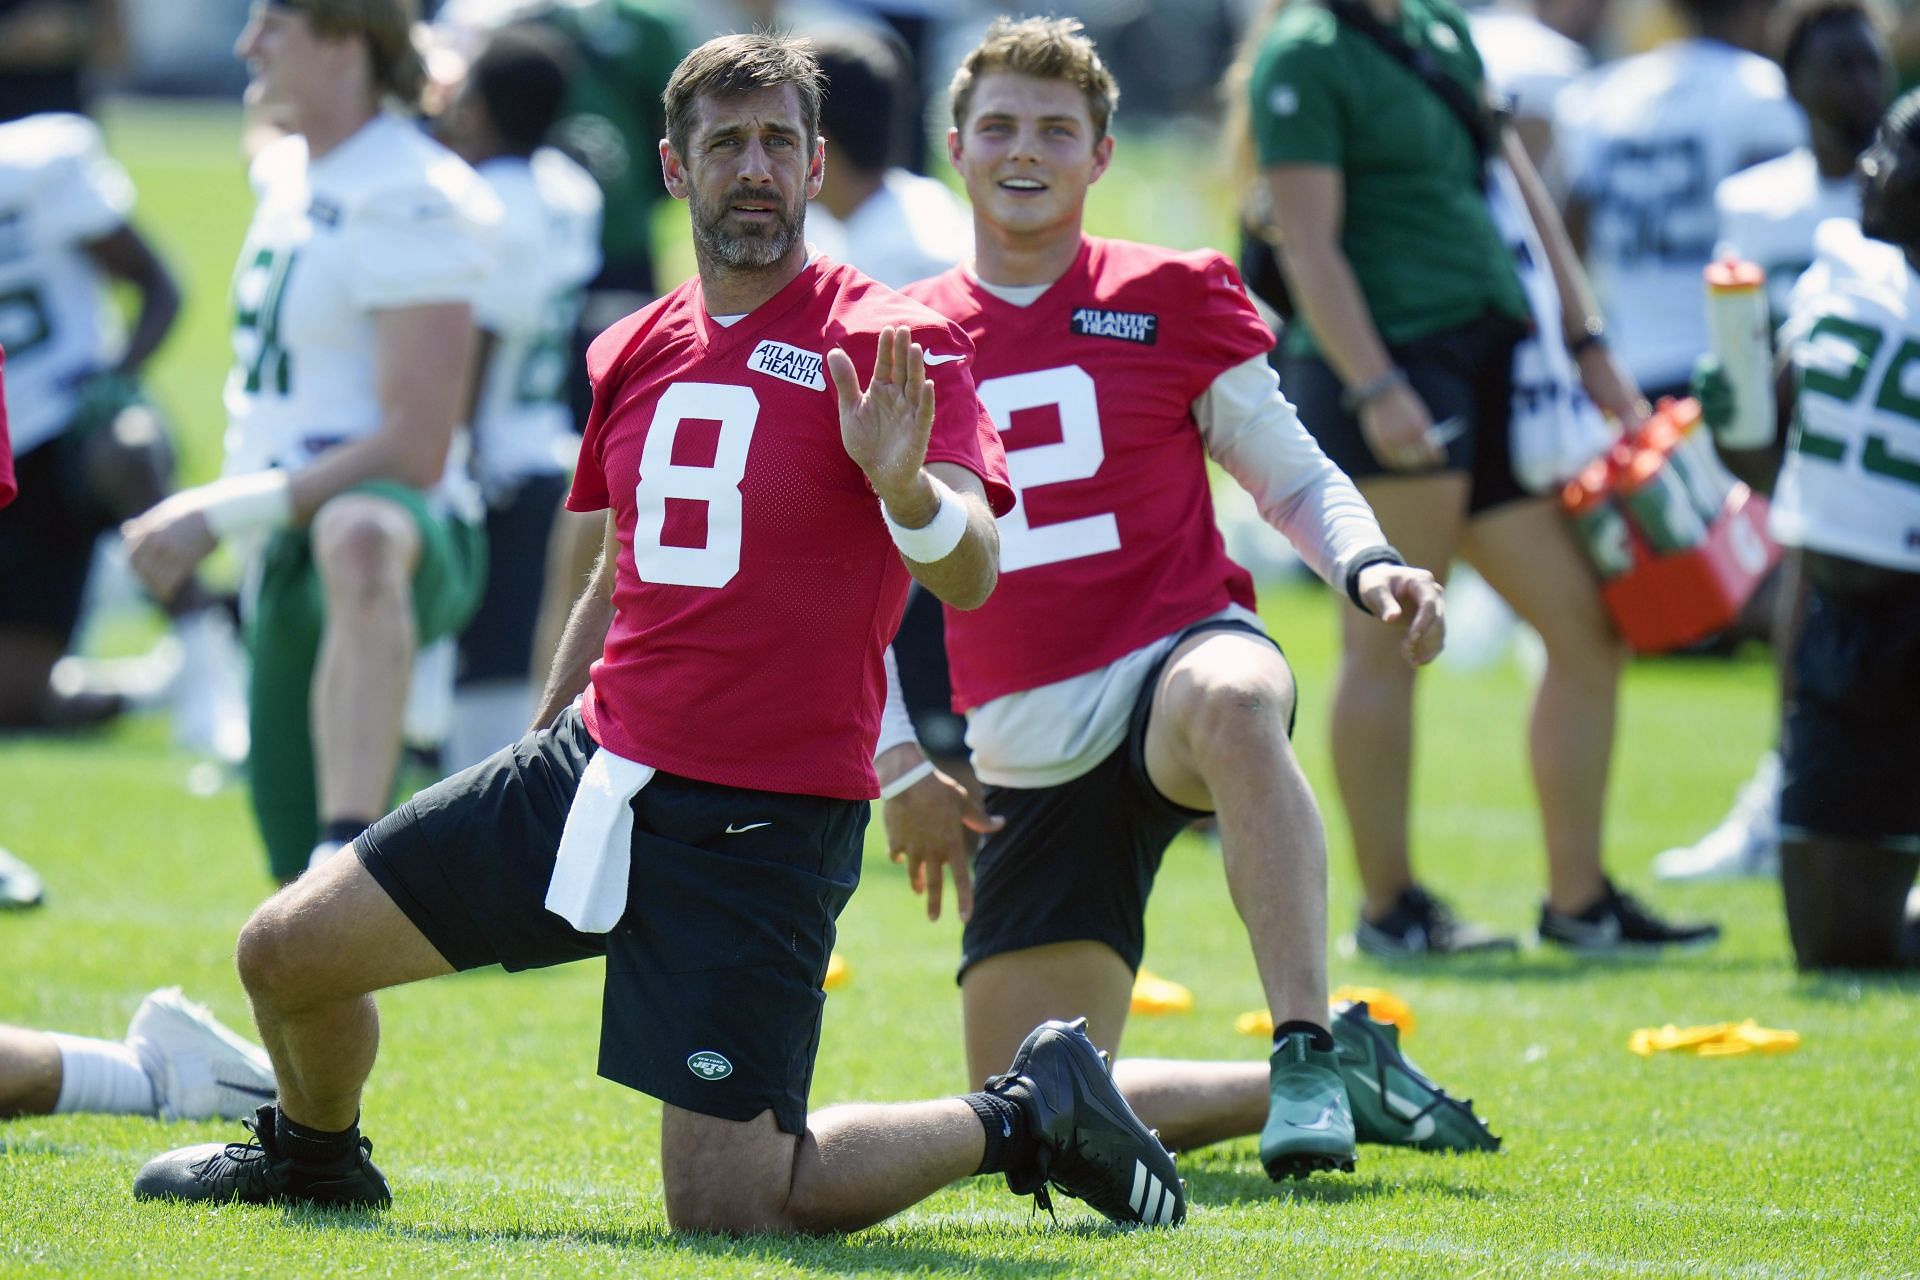 Zach Wilson and Aaron Rodgers: Jets Football